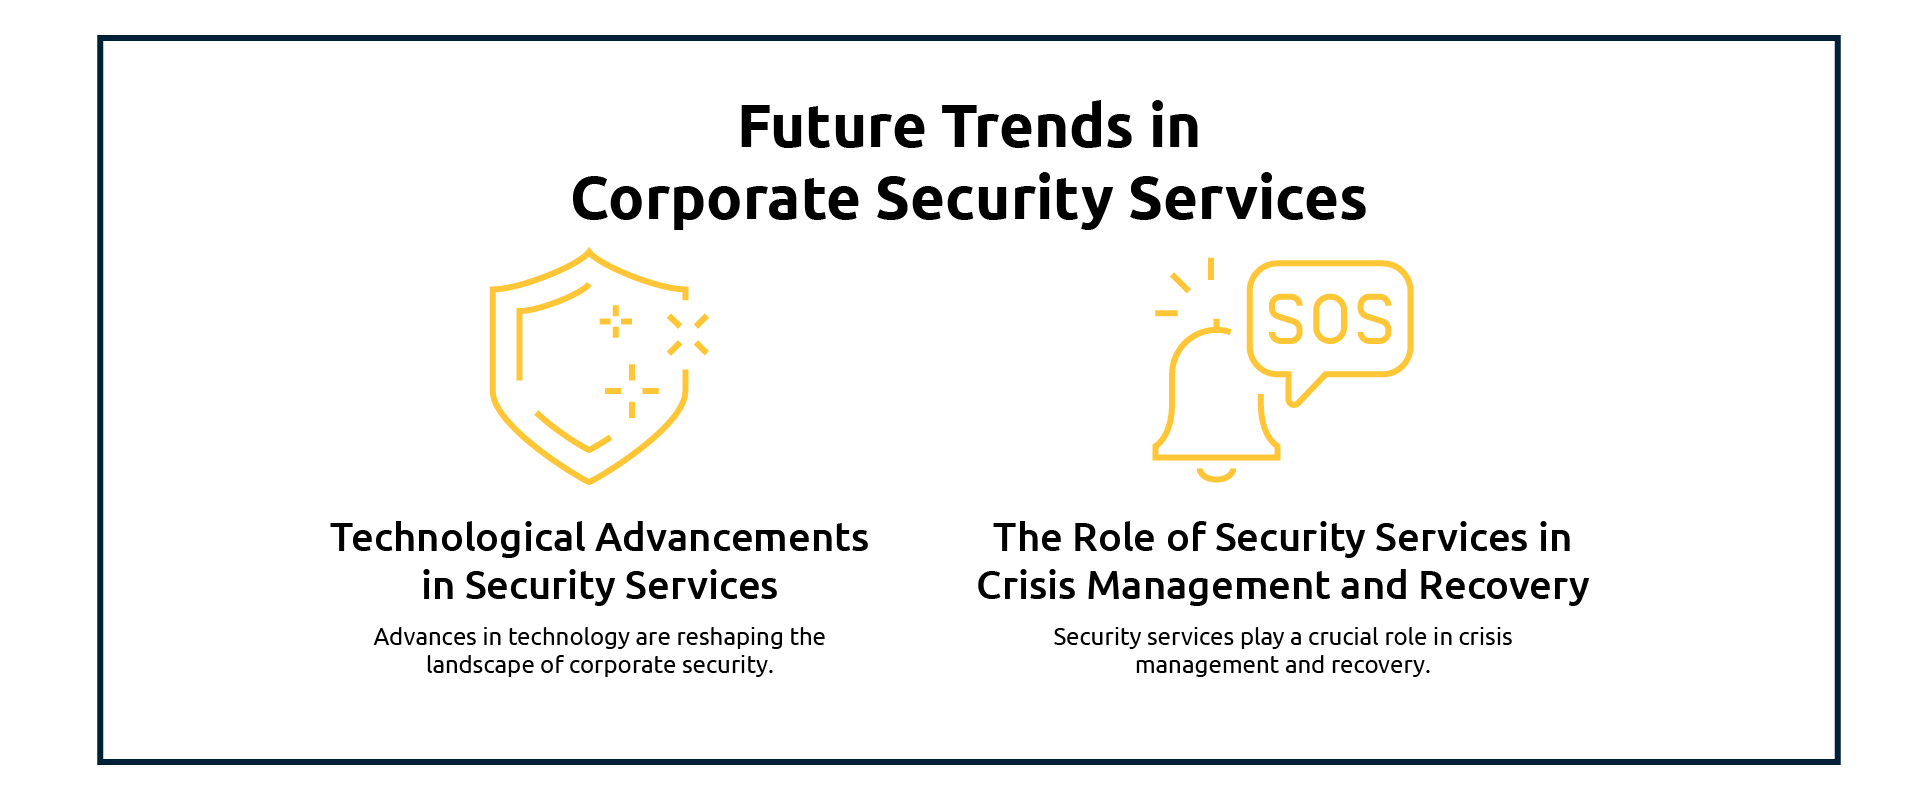 Future Trends in Corporate Security Services